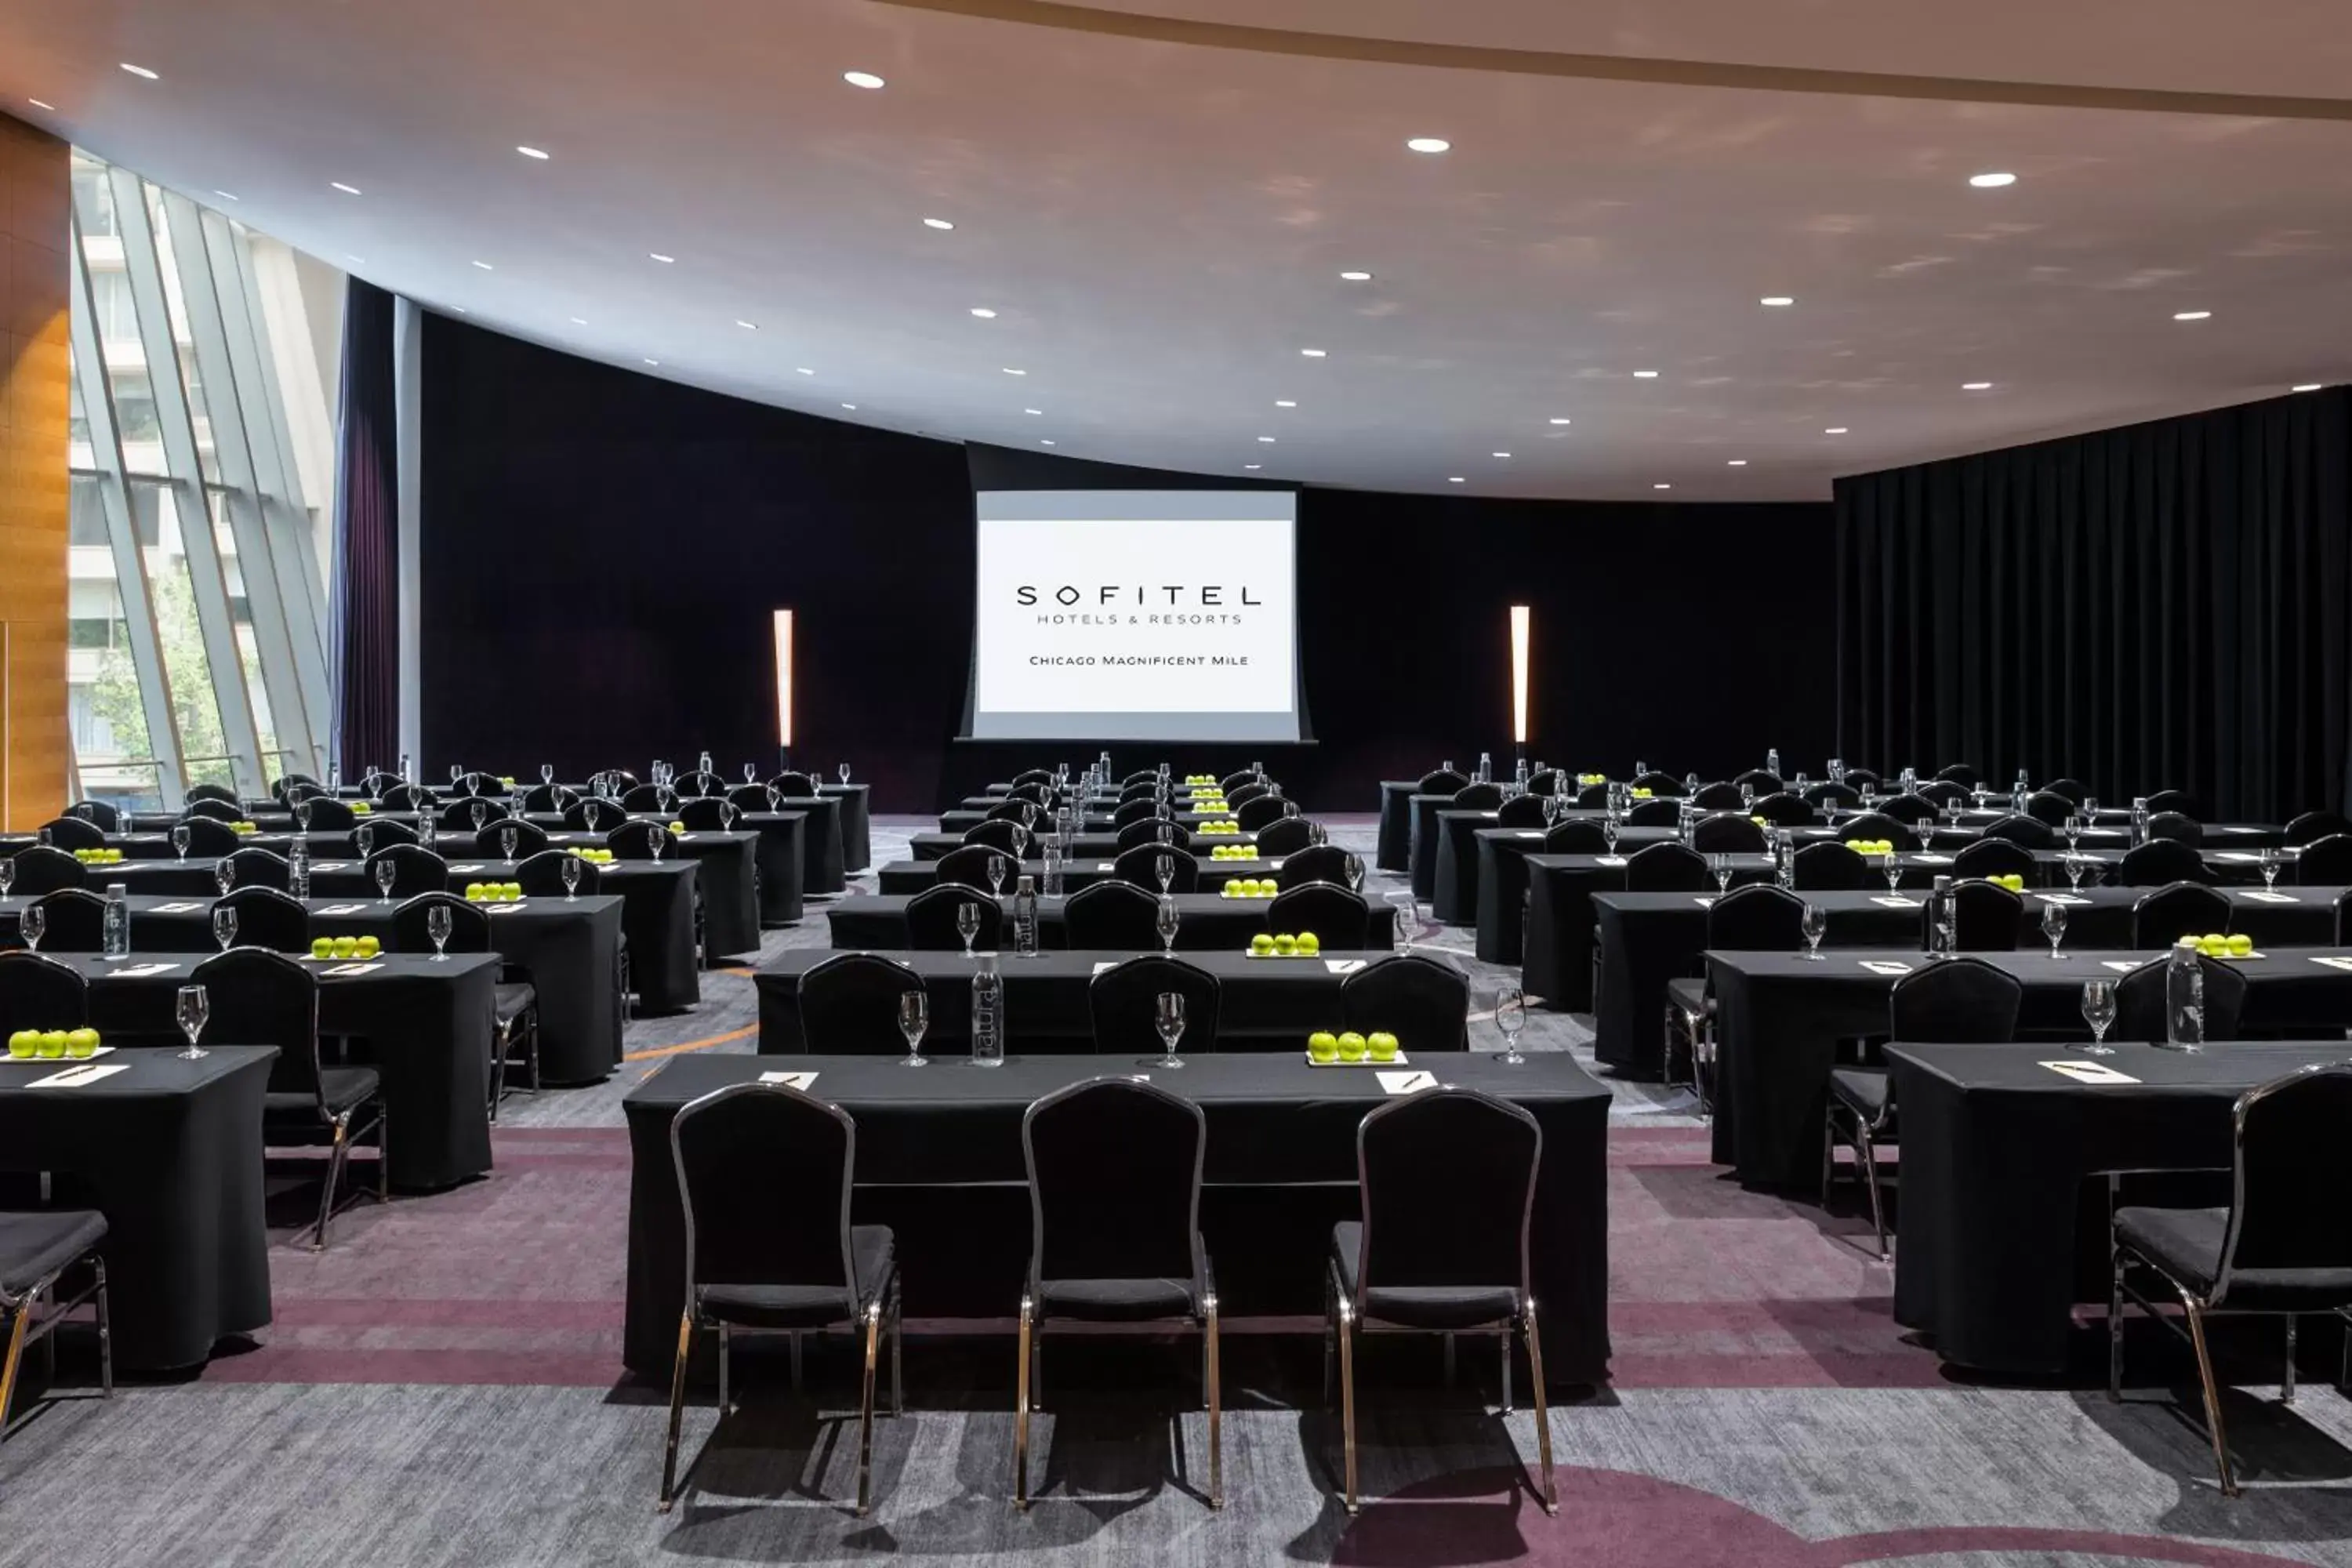 Meeting/conference room in Sofitel Chicago Magnificent Mile